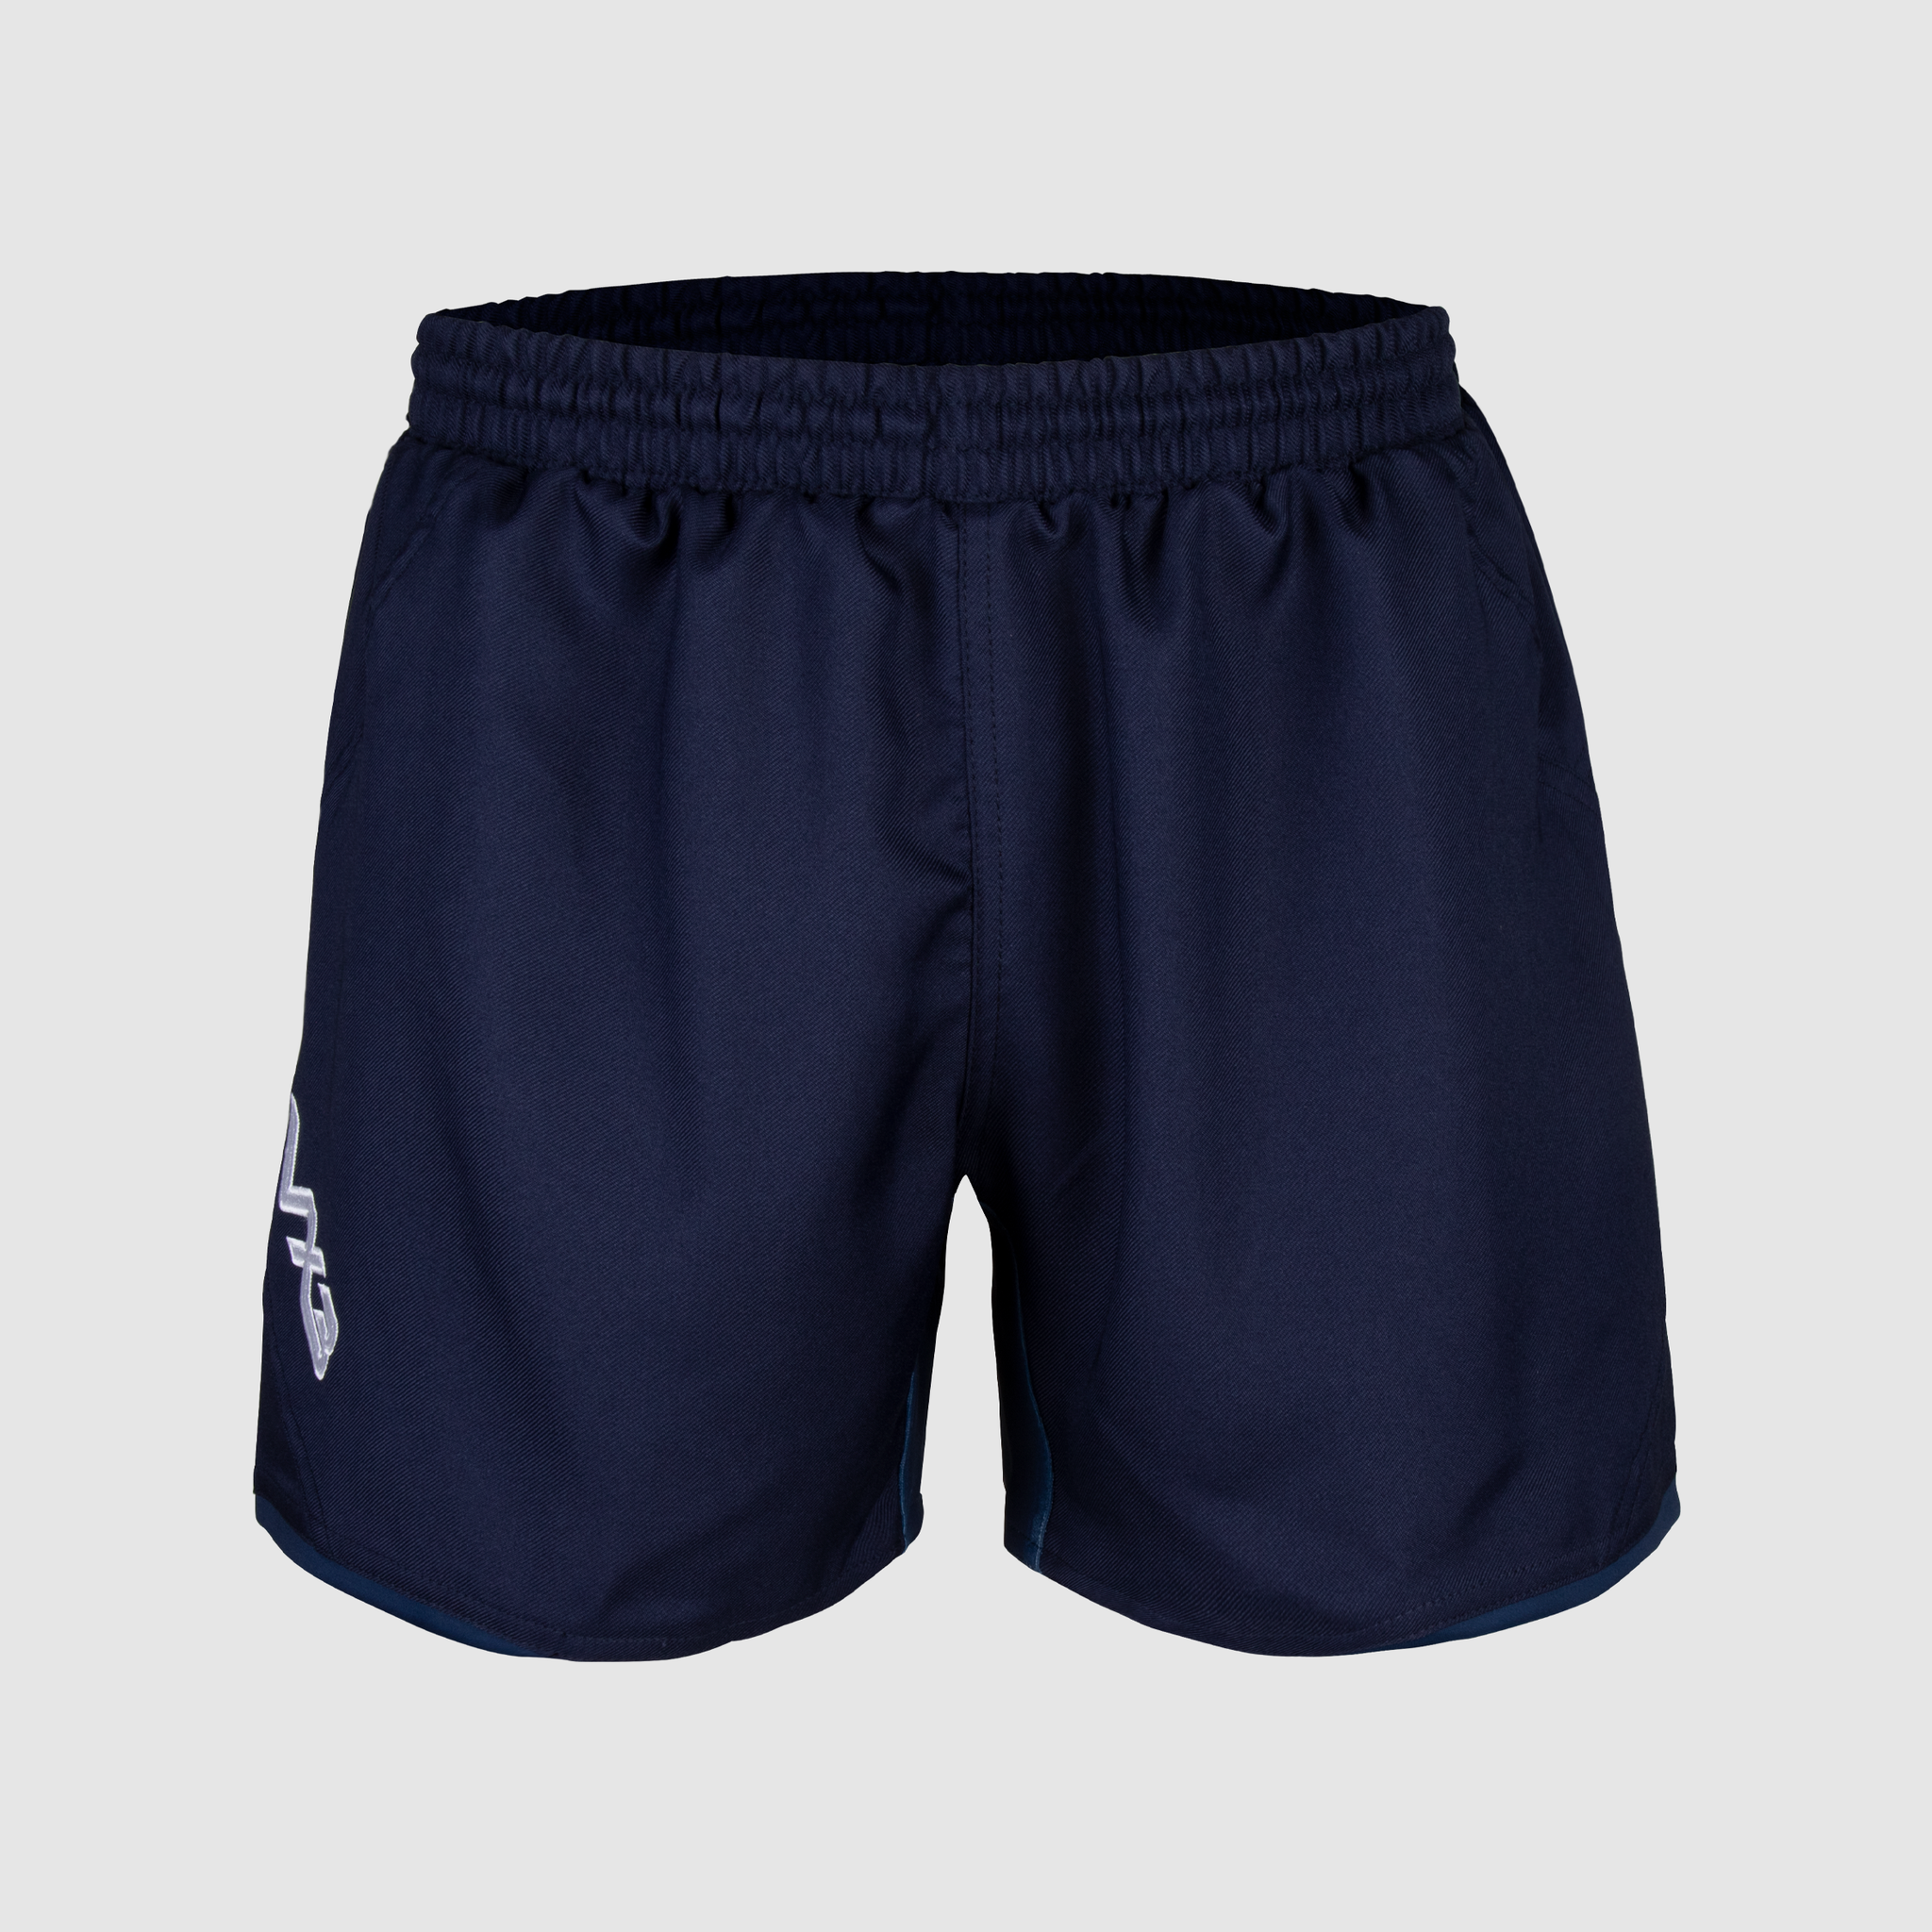 Prima Rugby Shorts Navy